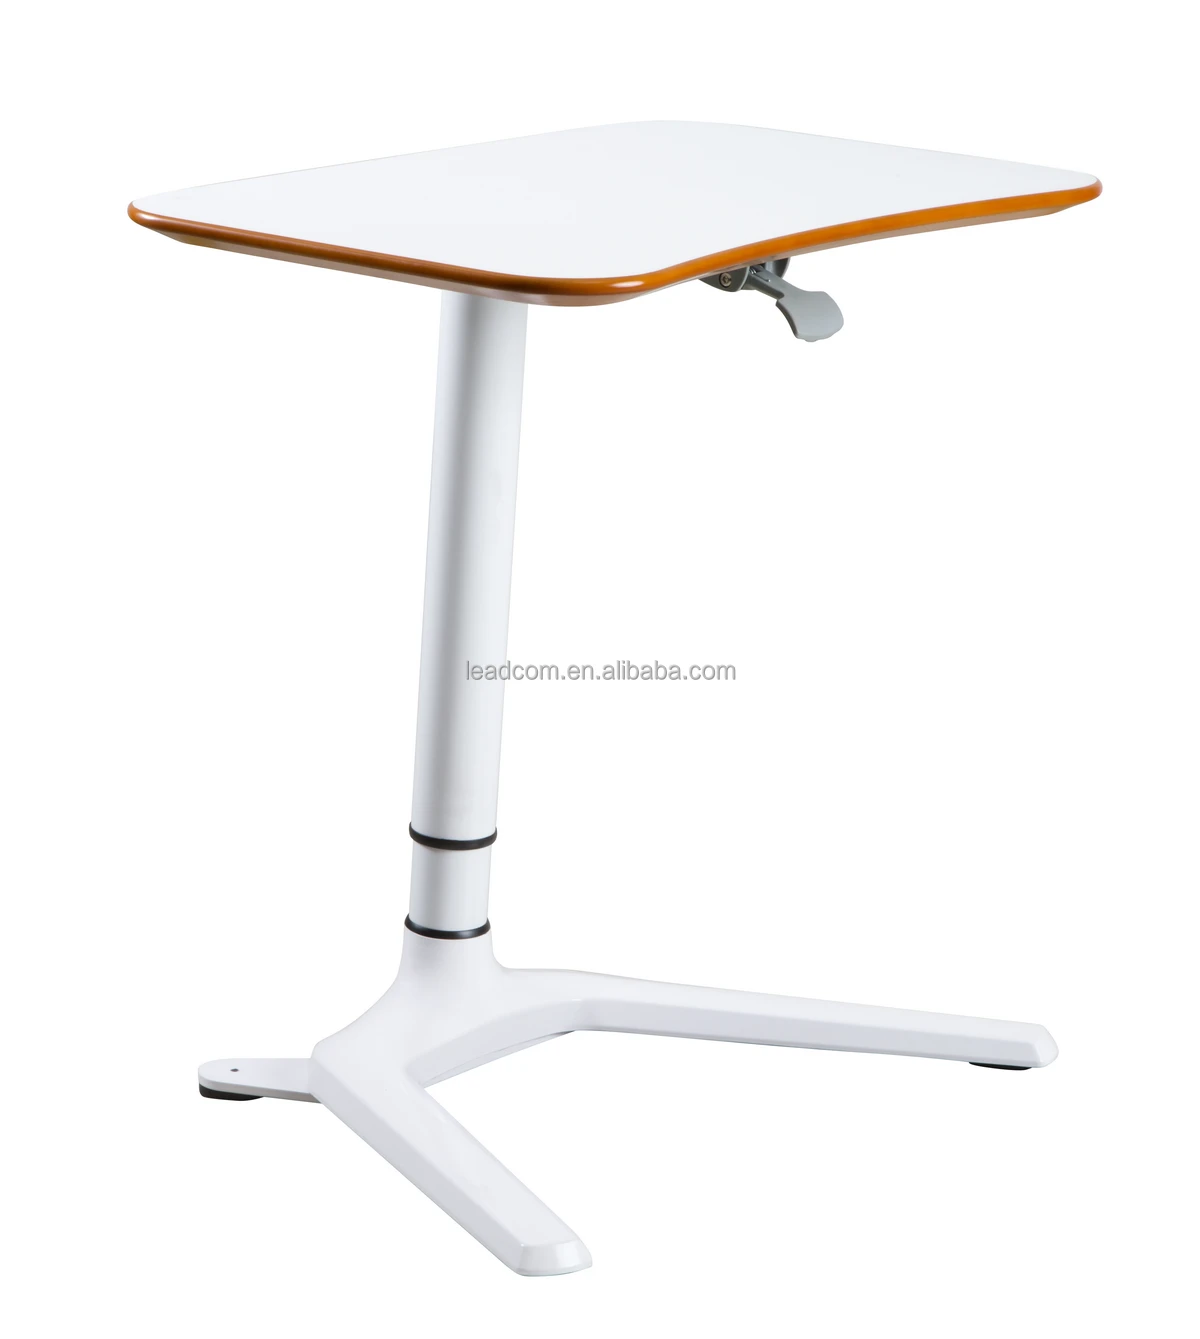 Lifan high quality new height adjustable work table folding office desks